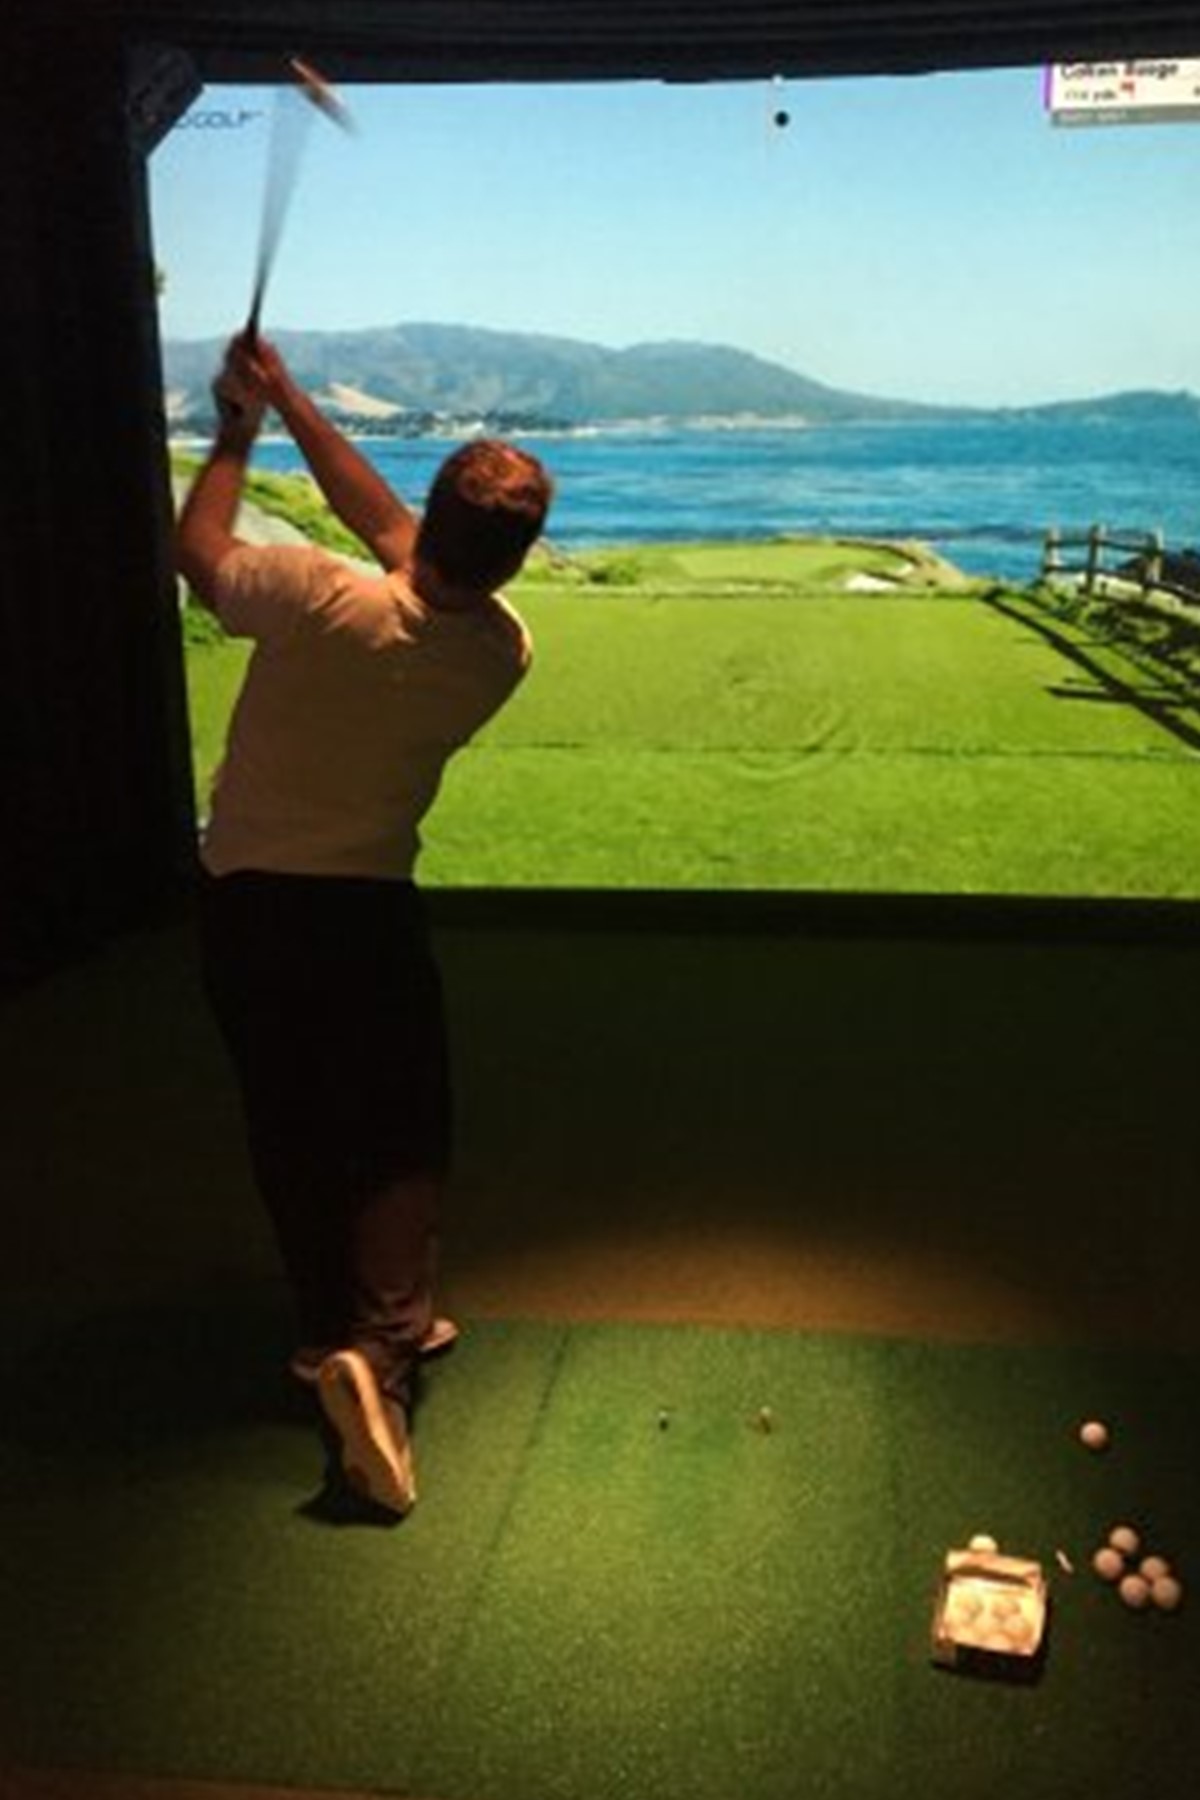 Person playing a golf simulator